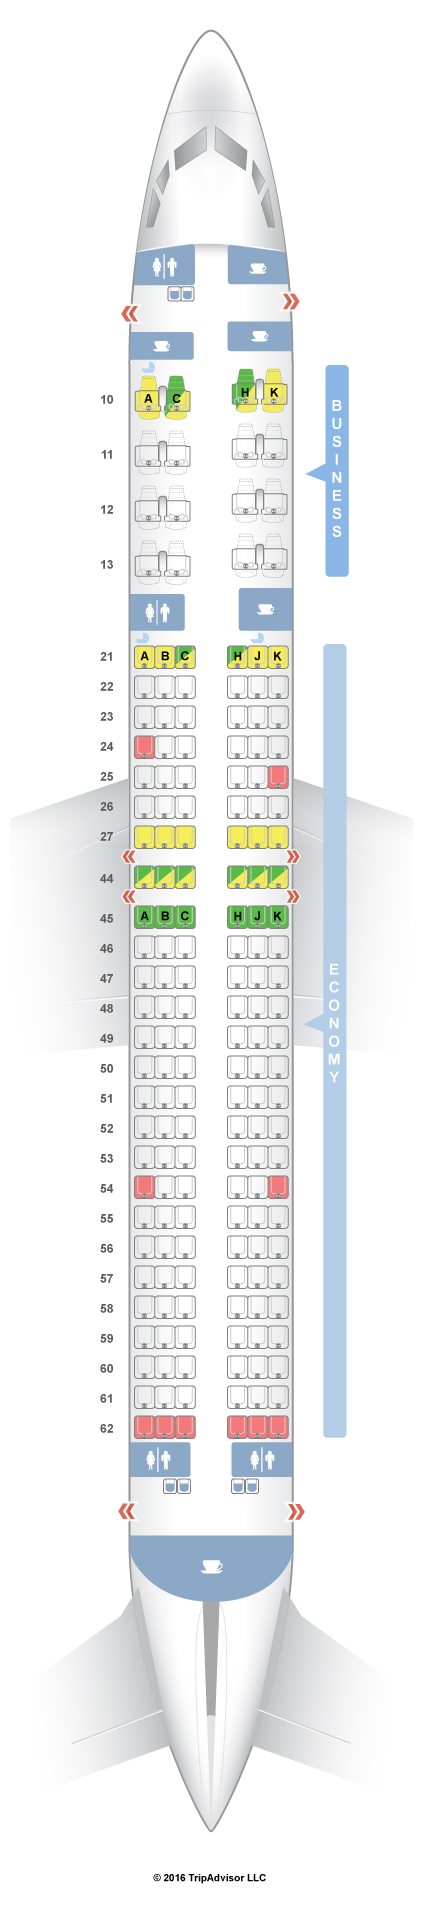 American Airlines 747 Seating Chart